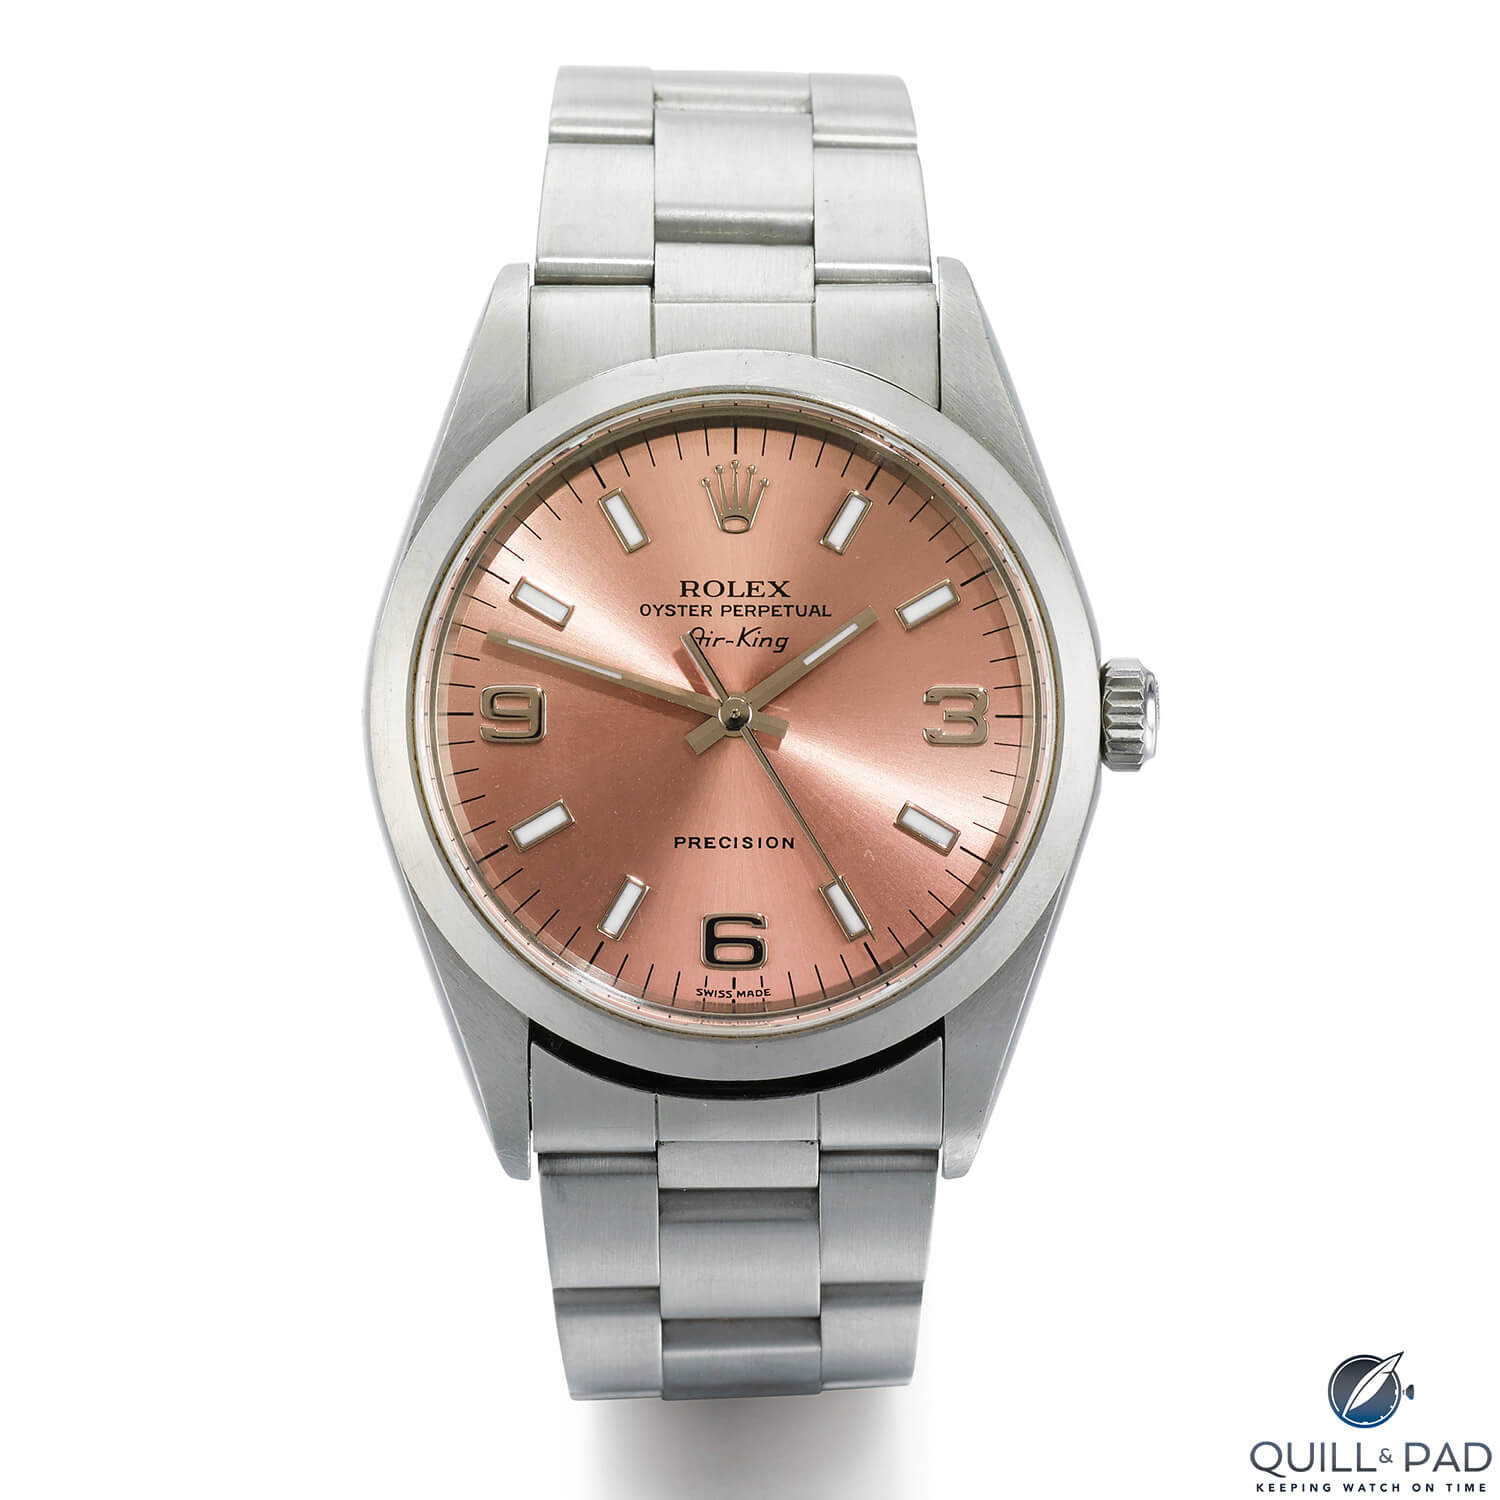 Rolex Air King with salmon dial (photo courtesy Sotheby's)